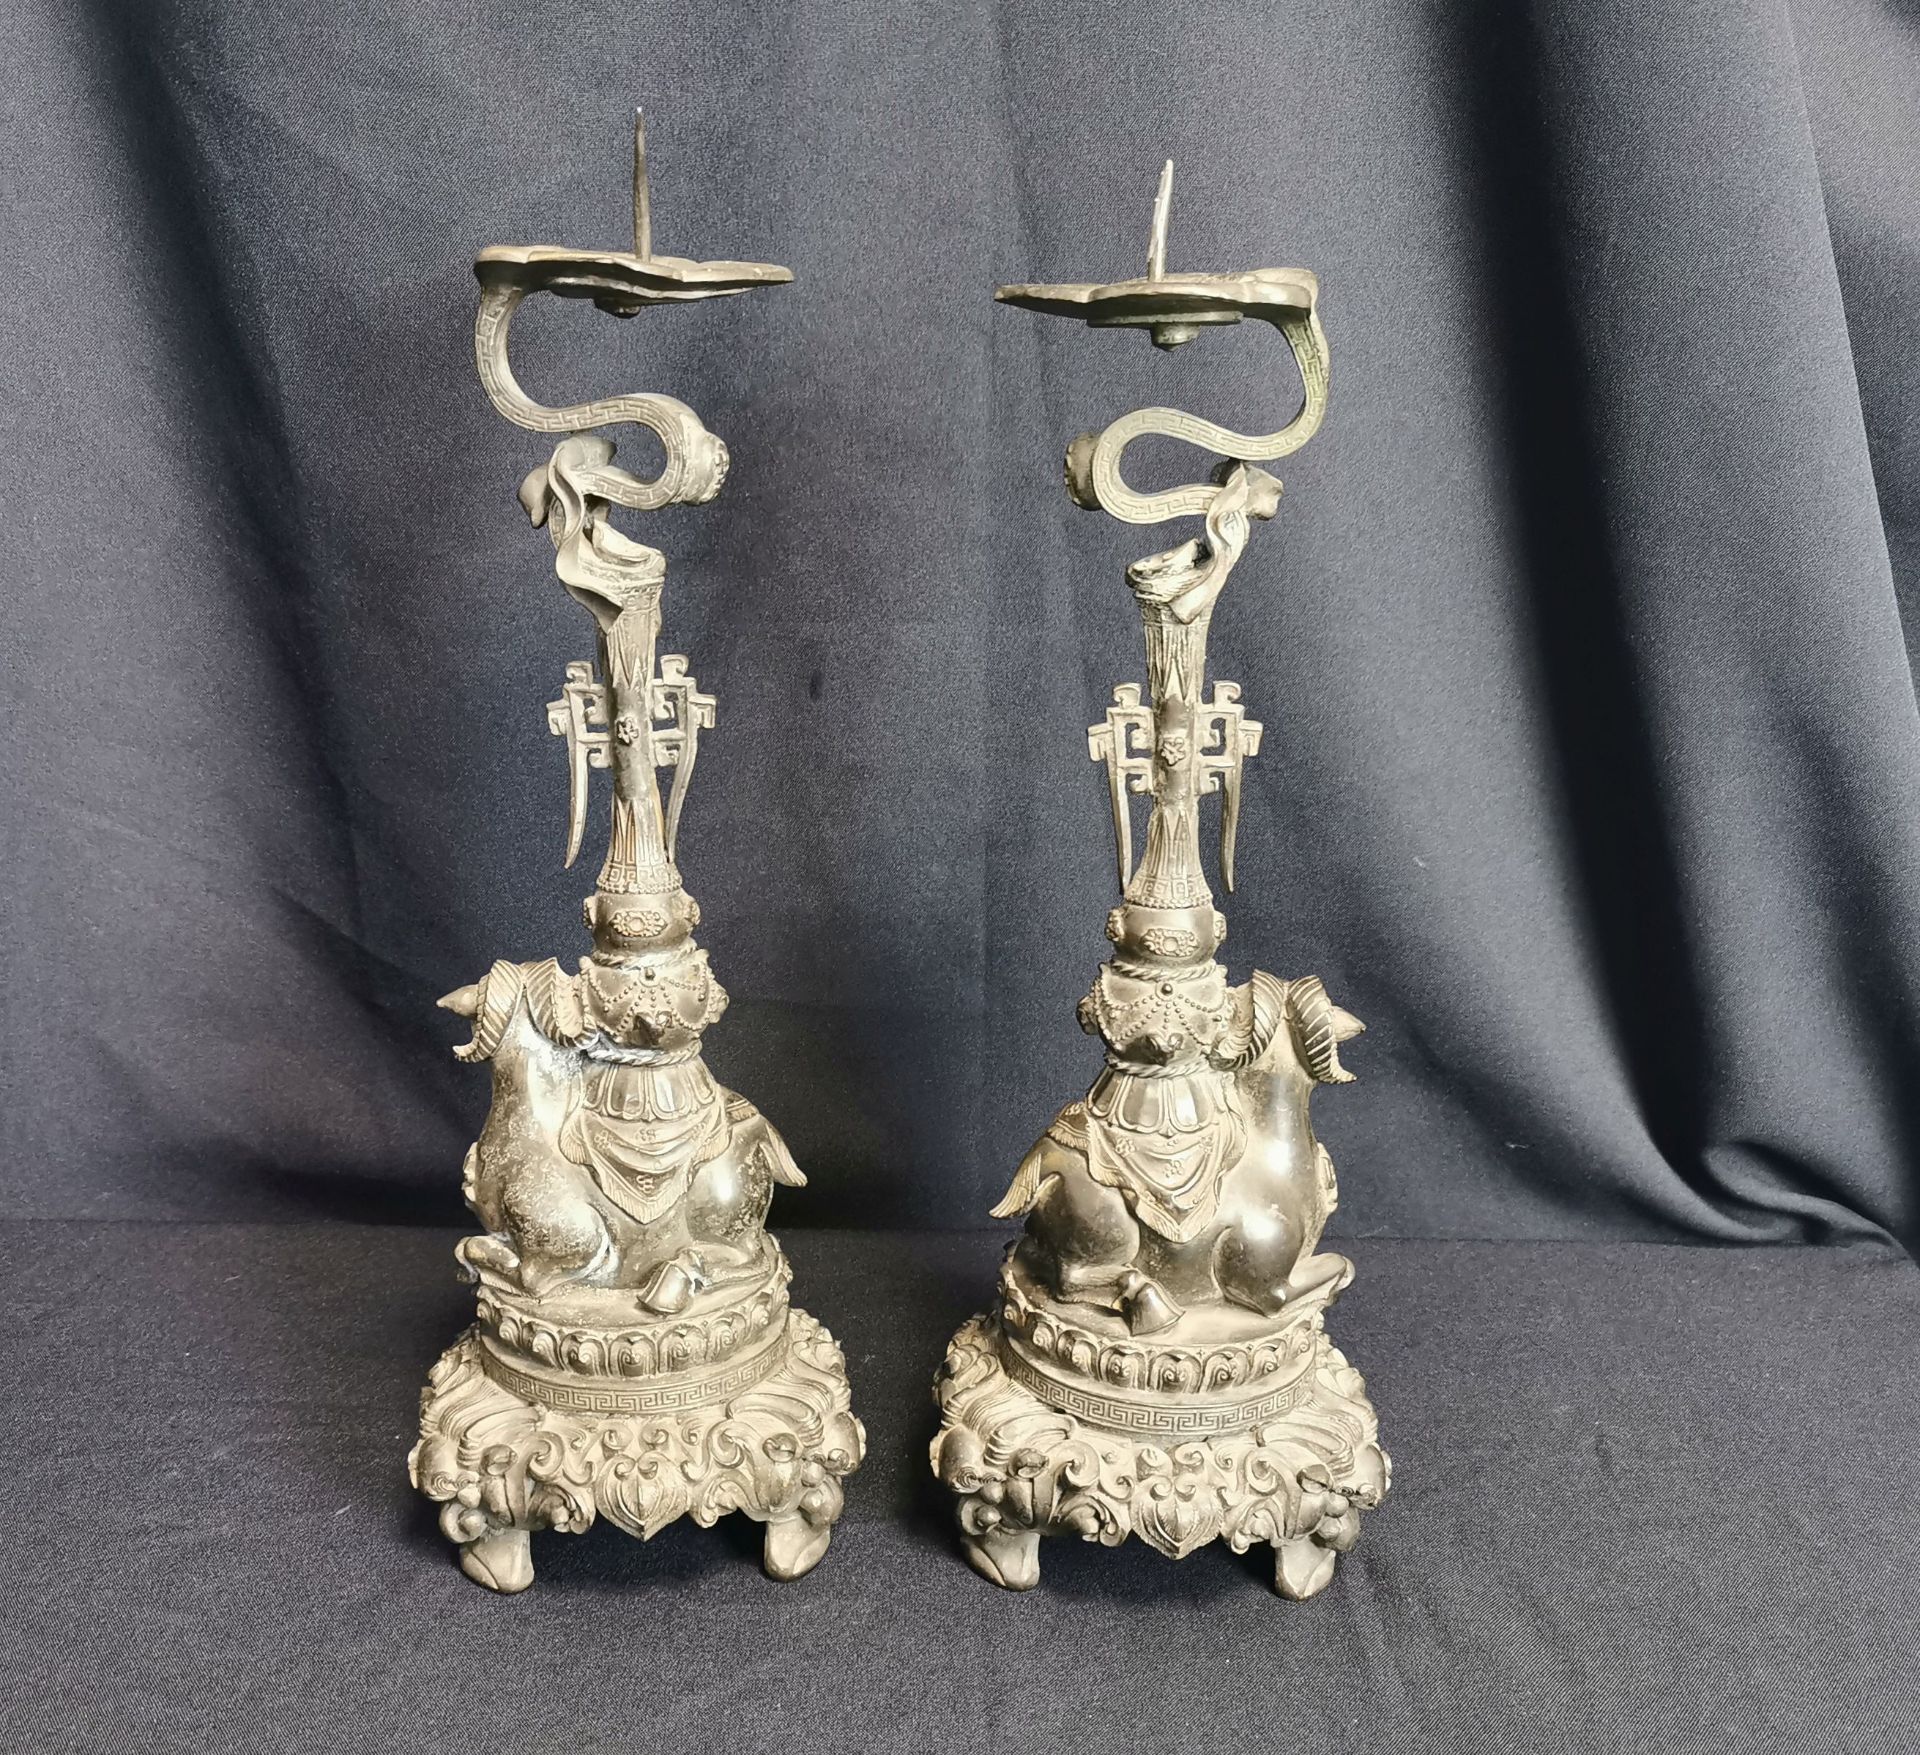 PAIR OF CANDLE STANDS WITH RAMS - Image 5 of 7